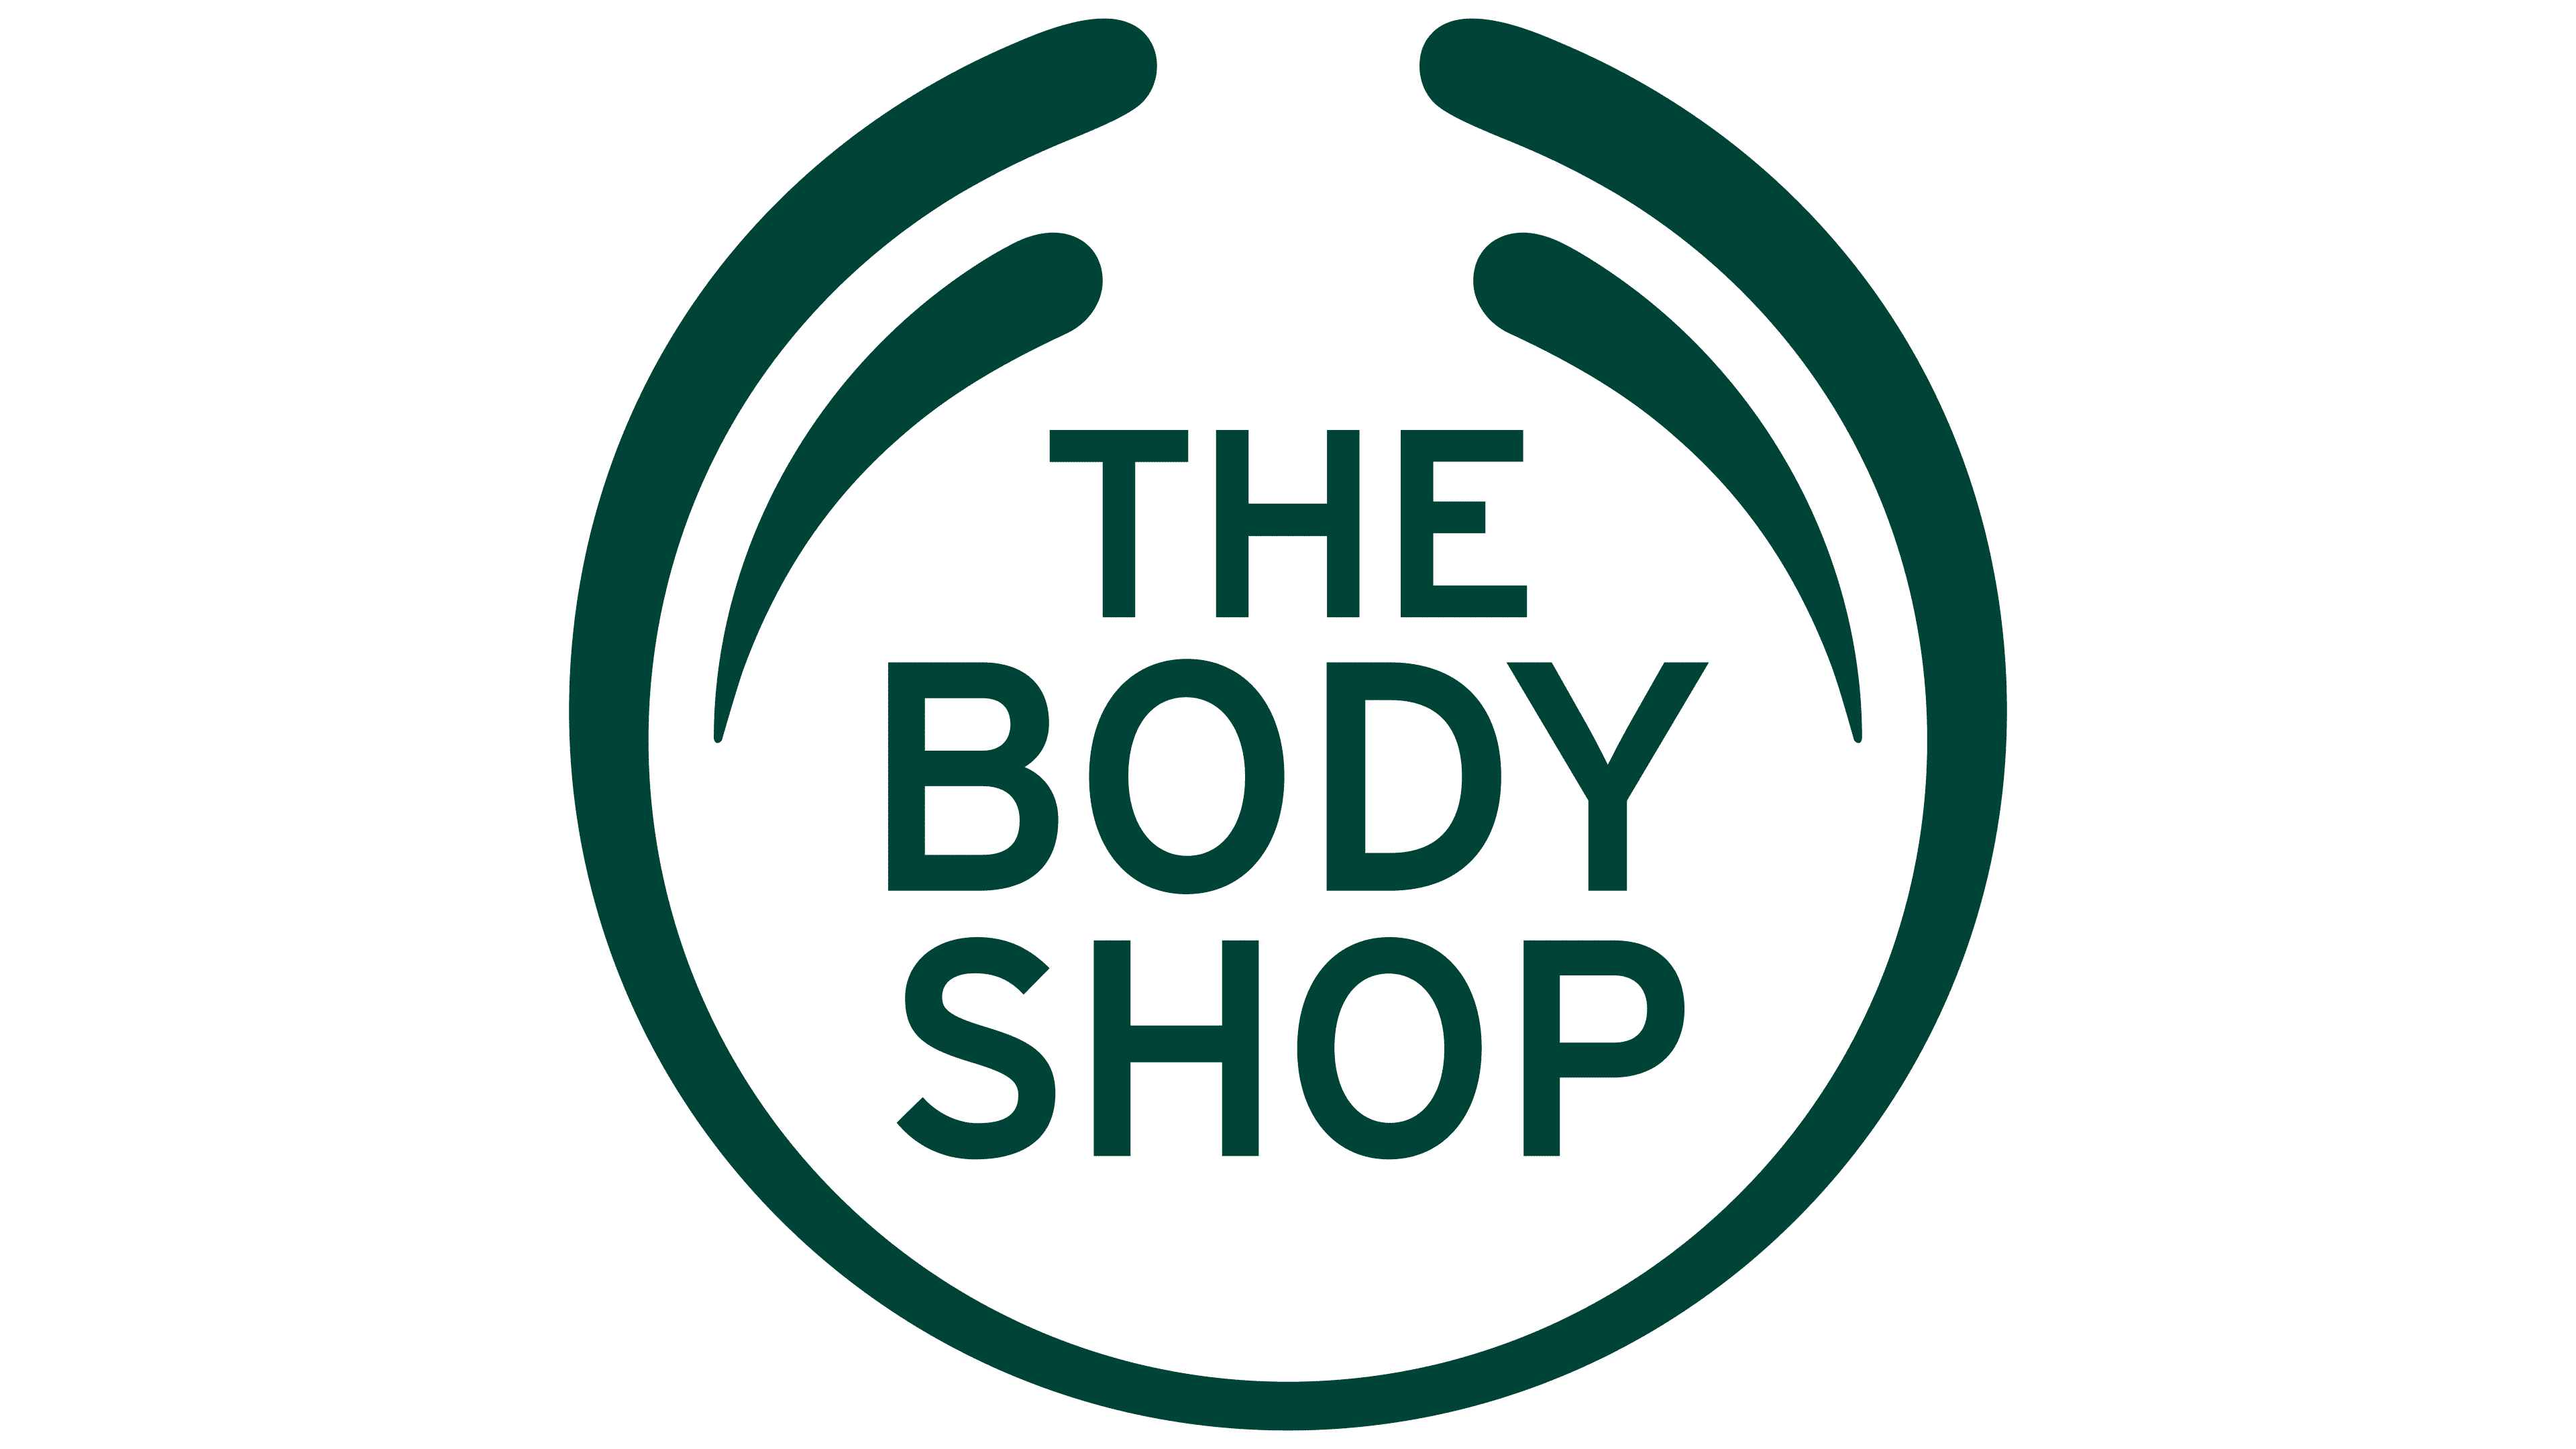 The Body Shop - 15% off Love Your Body Club + Free gift with 1st order